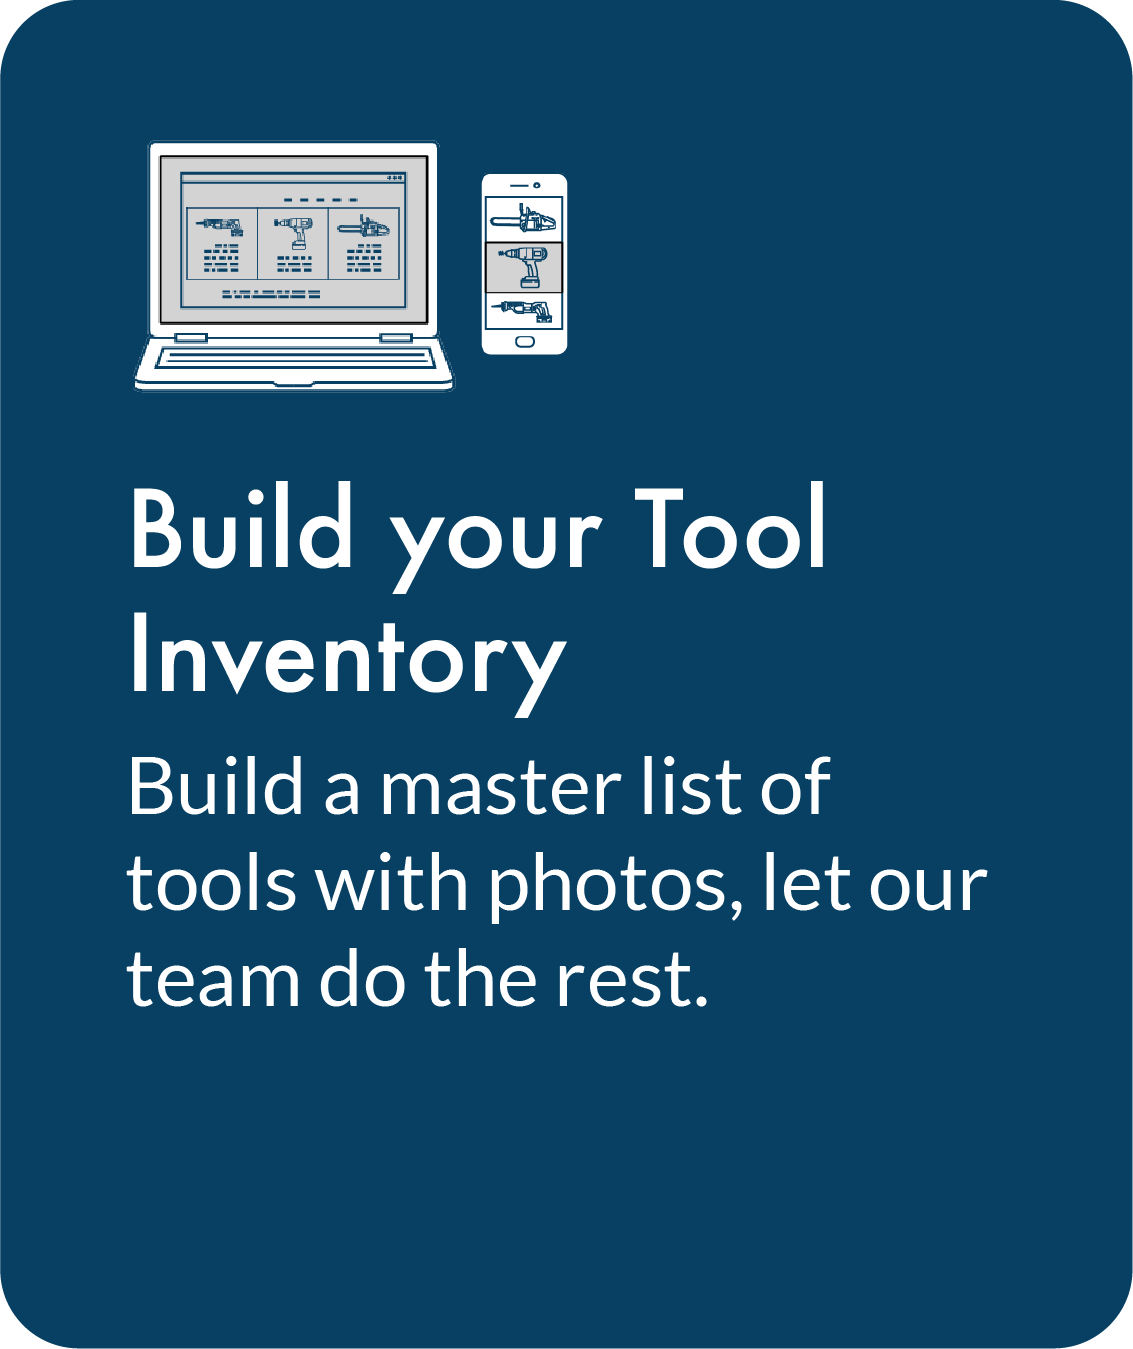 Build Your Tool Inventory. Build a master list of tools with photos, let our team do the rest.